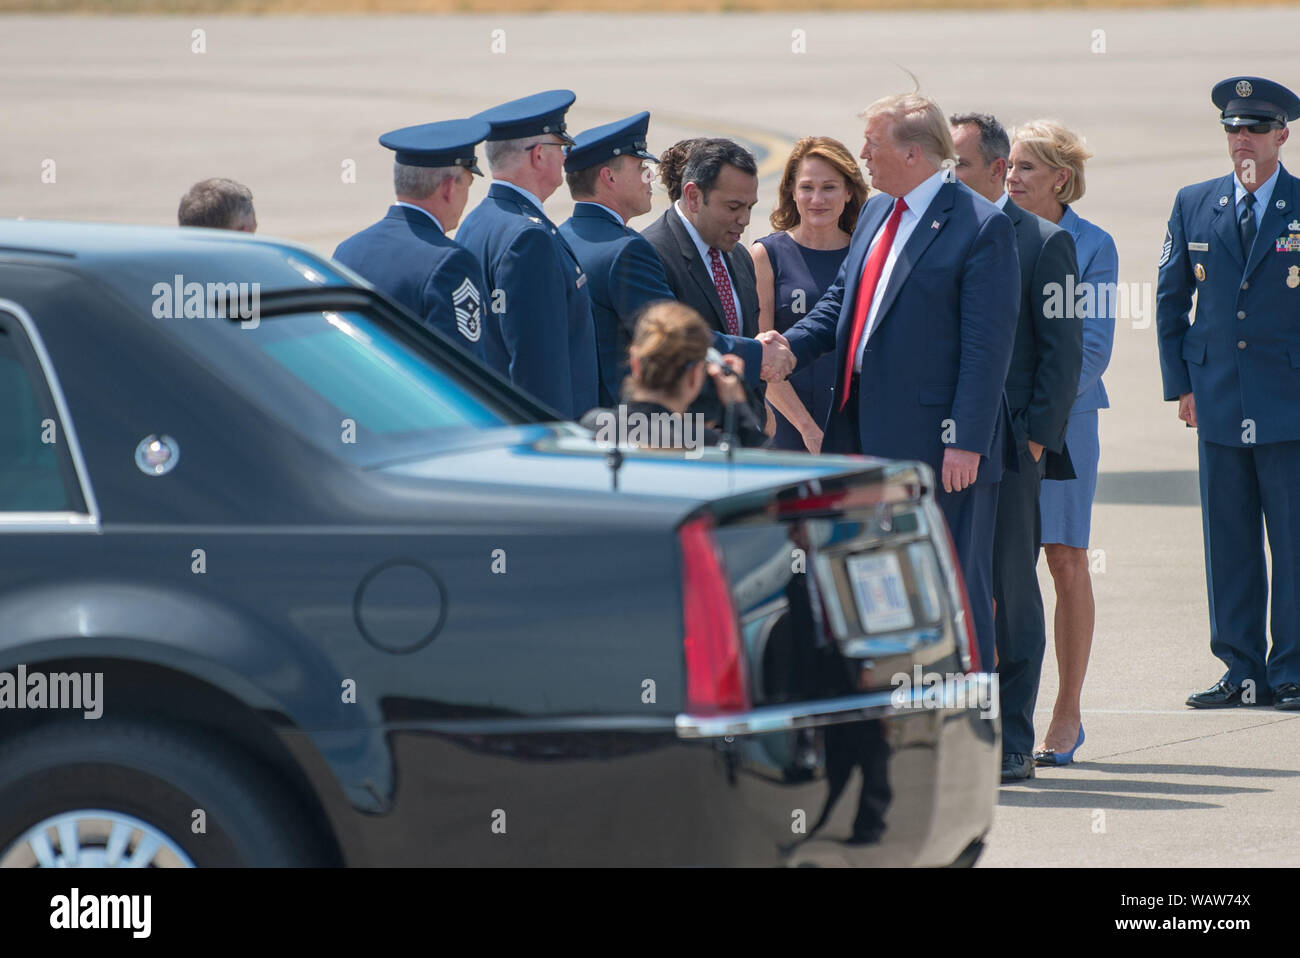 President Donald Trump greets leadership from the Kentucky Air National Guard as he arrives at the 123rd Airlift Wing in Louisville, Ky., Aug. 21, 2019. Trump was in town to speak at an AMVETS convention and attend a fundraiser for Kentucky Gov. Matt Bevin’s re-election campaign. (U.S. Air National Guard photo by Phil Speck) Stock Photo